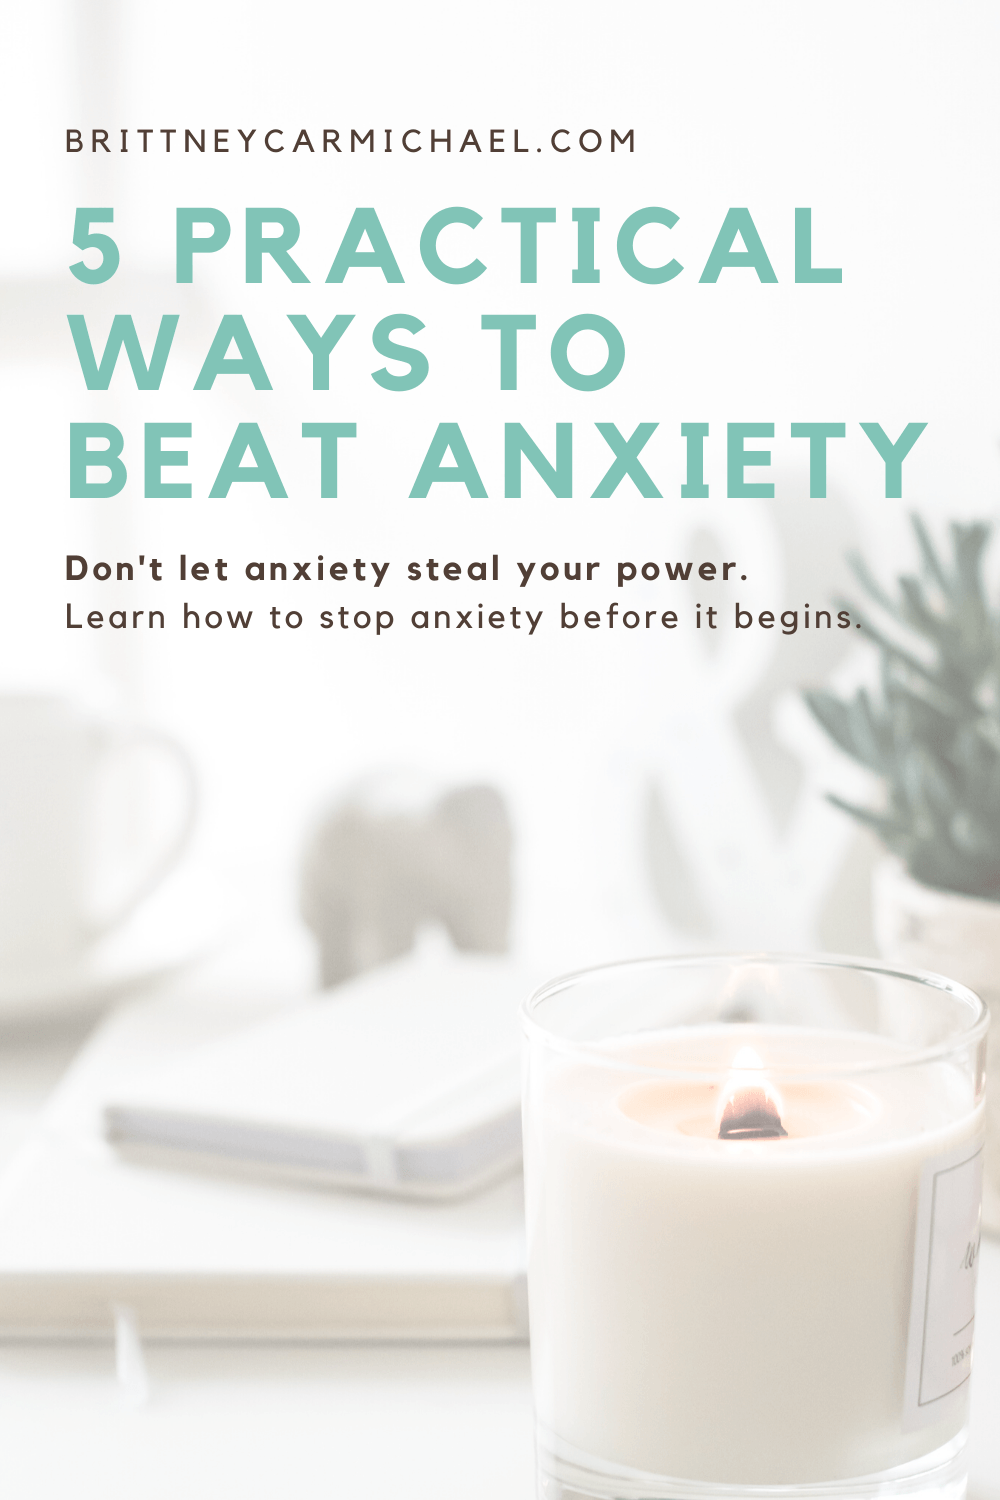 5 Practical Ways to Beat Anxiety (1)